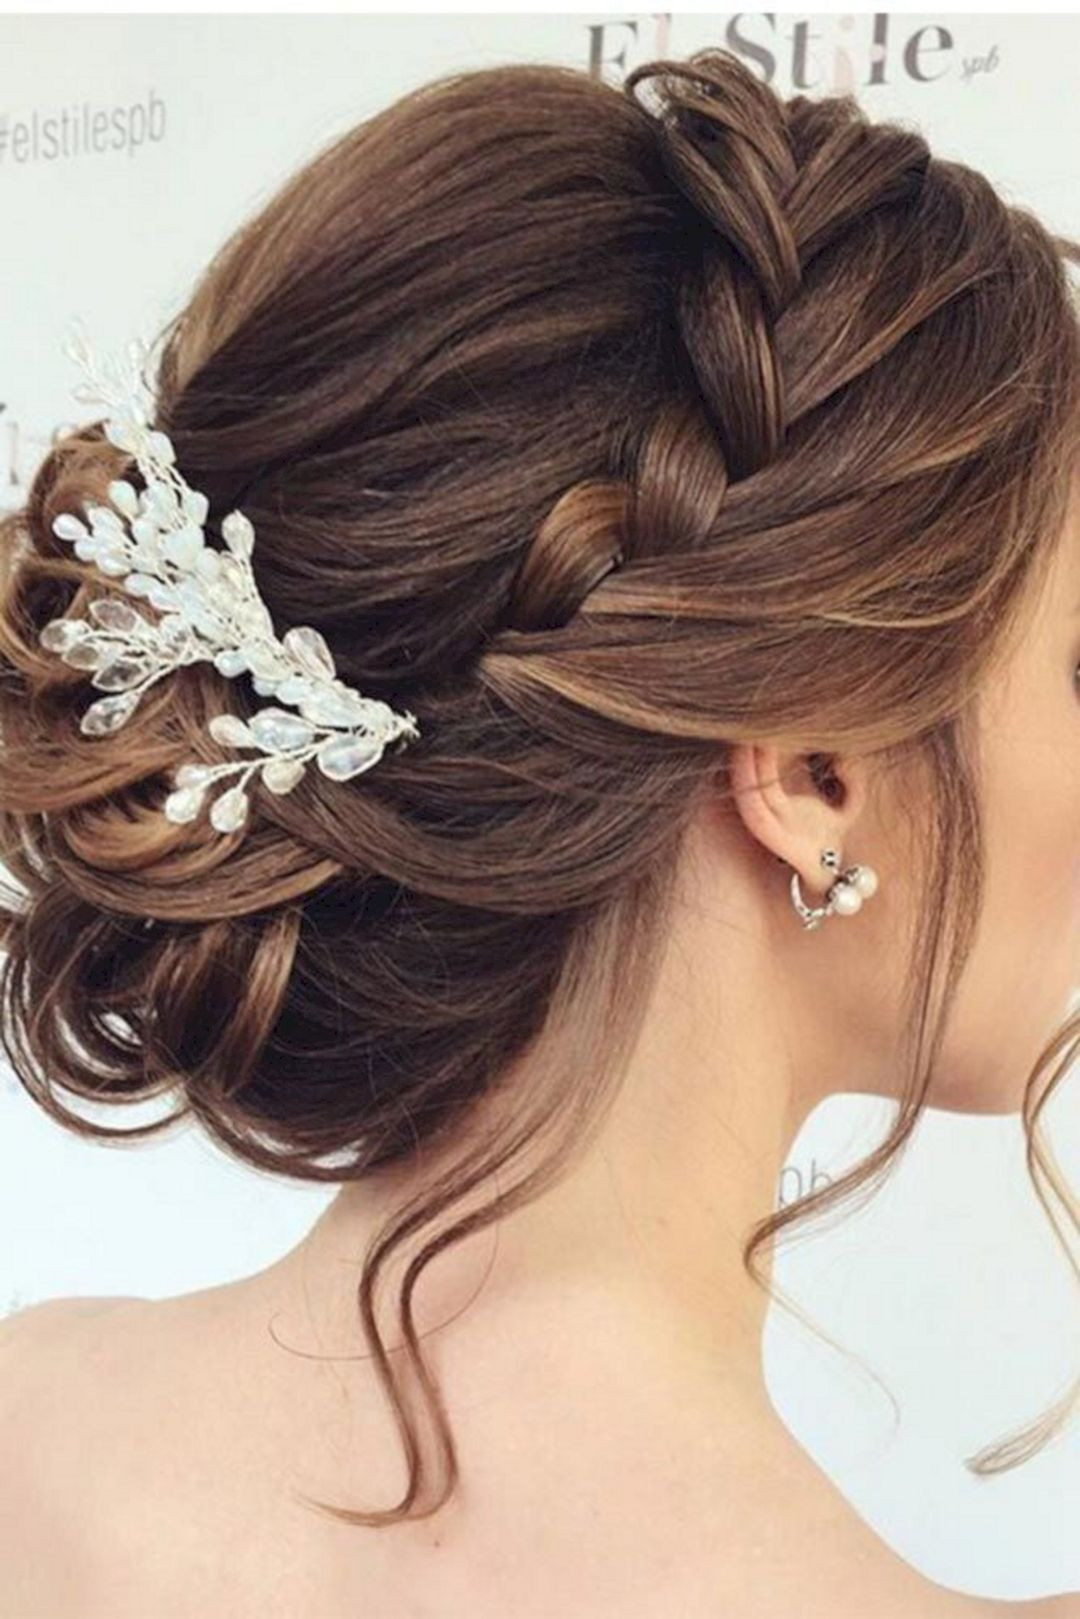 Easy Hairstyles For Bridesmaids
 Bridesmaid Updo Hairstyles Long Hair – OOSILE